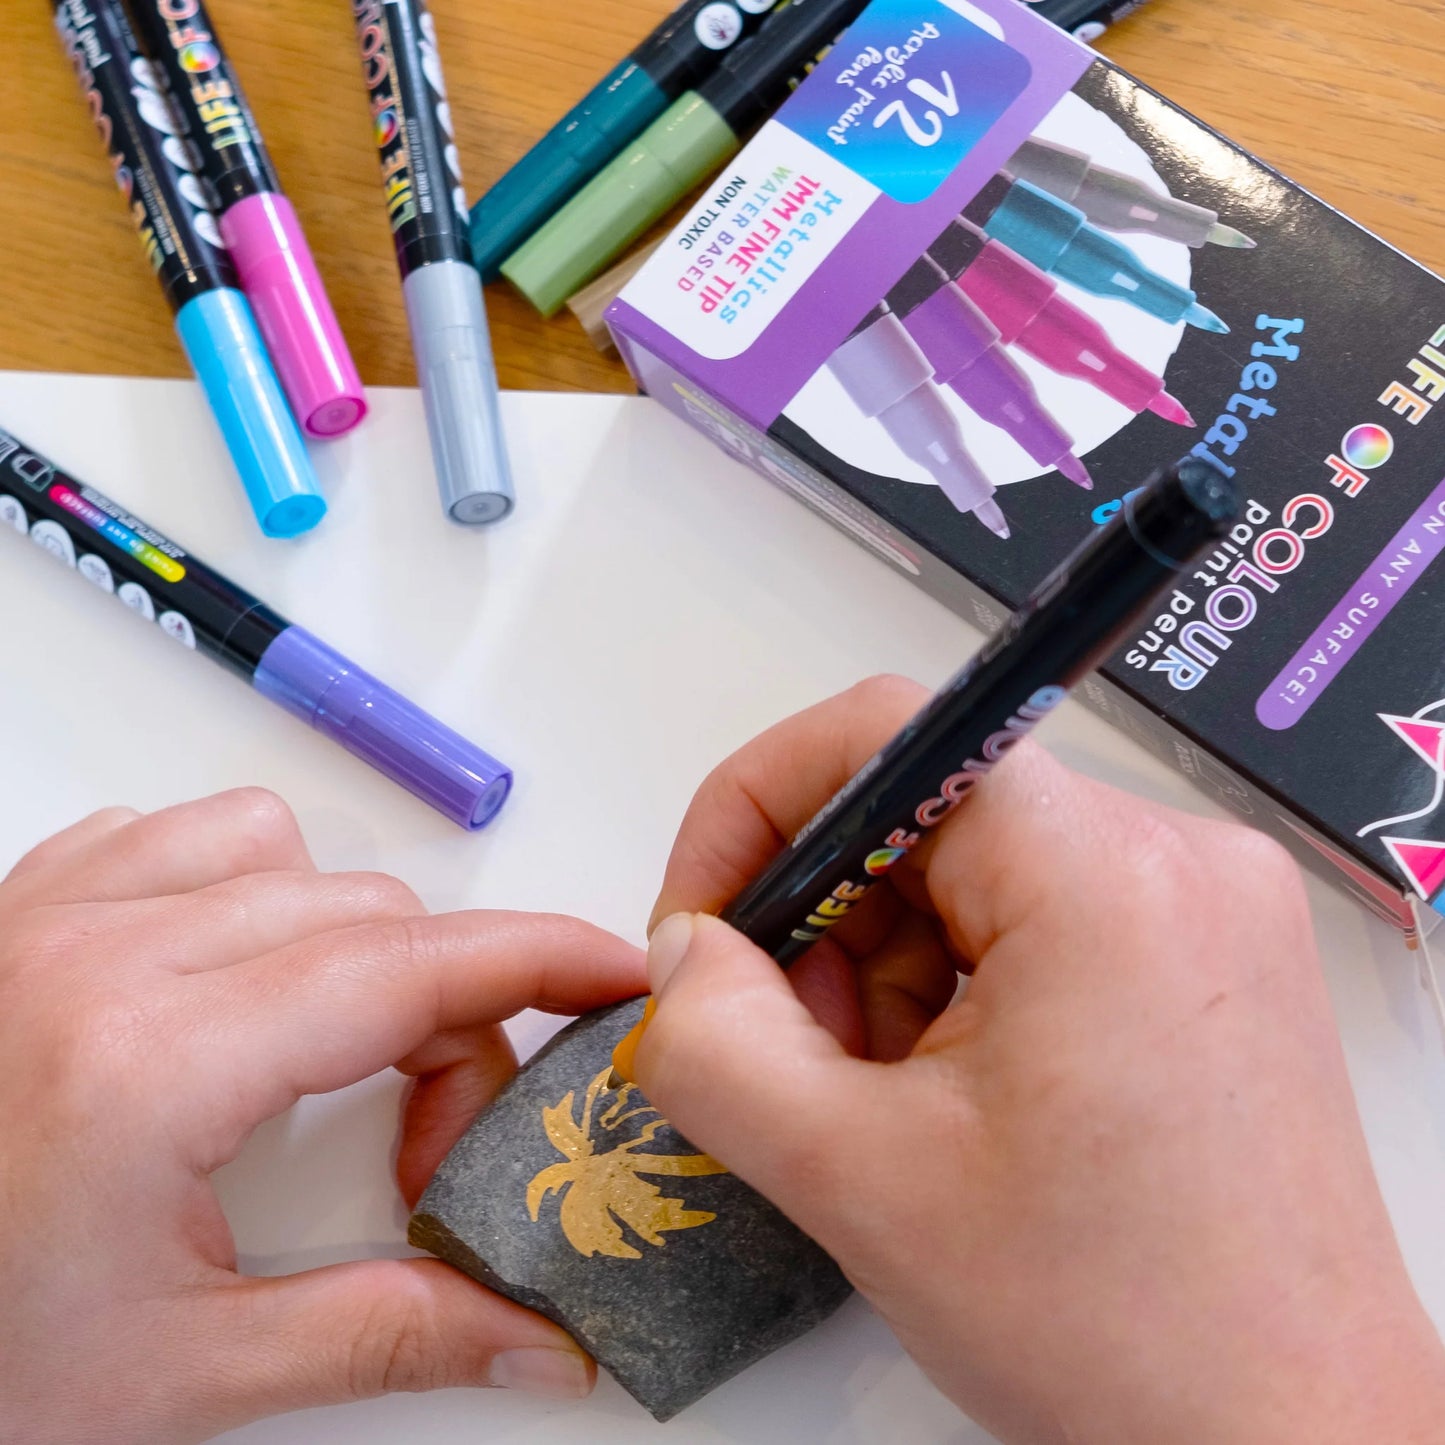 Load image into Gallery viewer, Fine Tip Acrylic Paint Pens | Metallics
